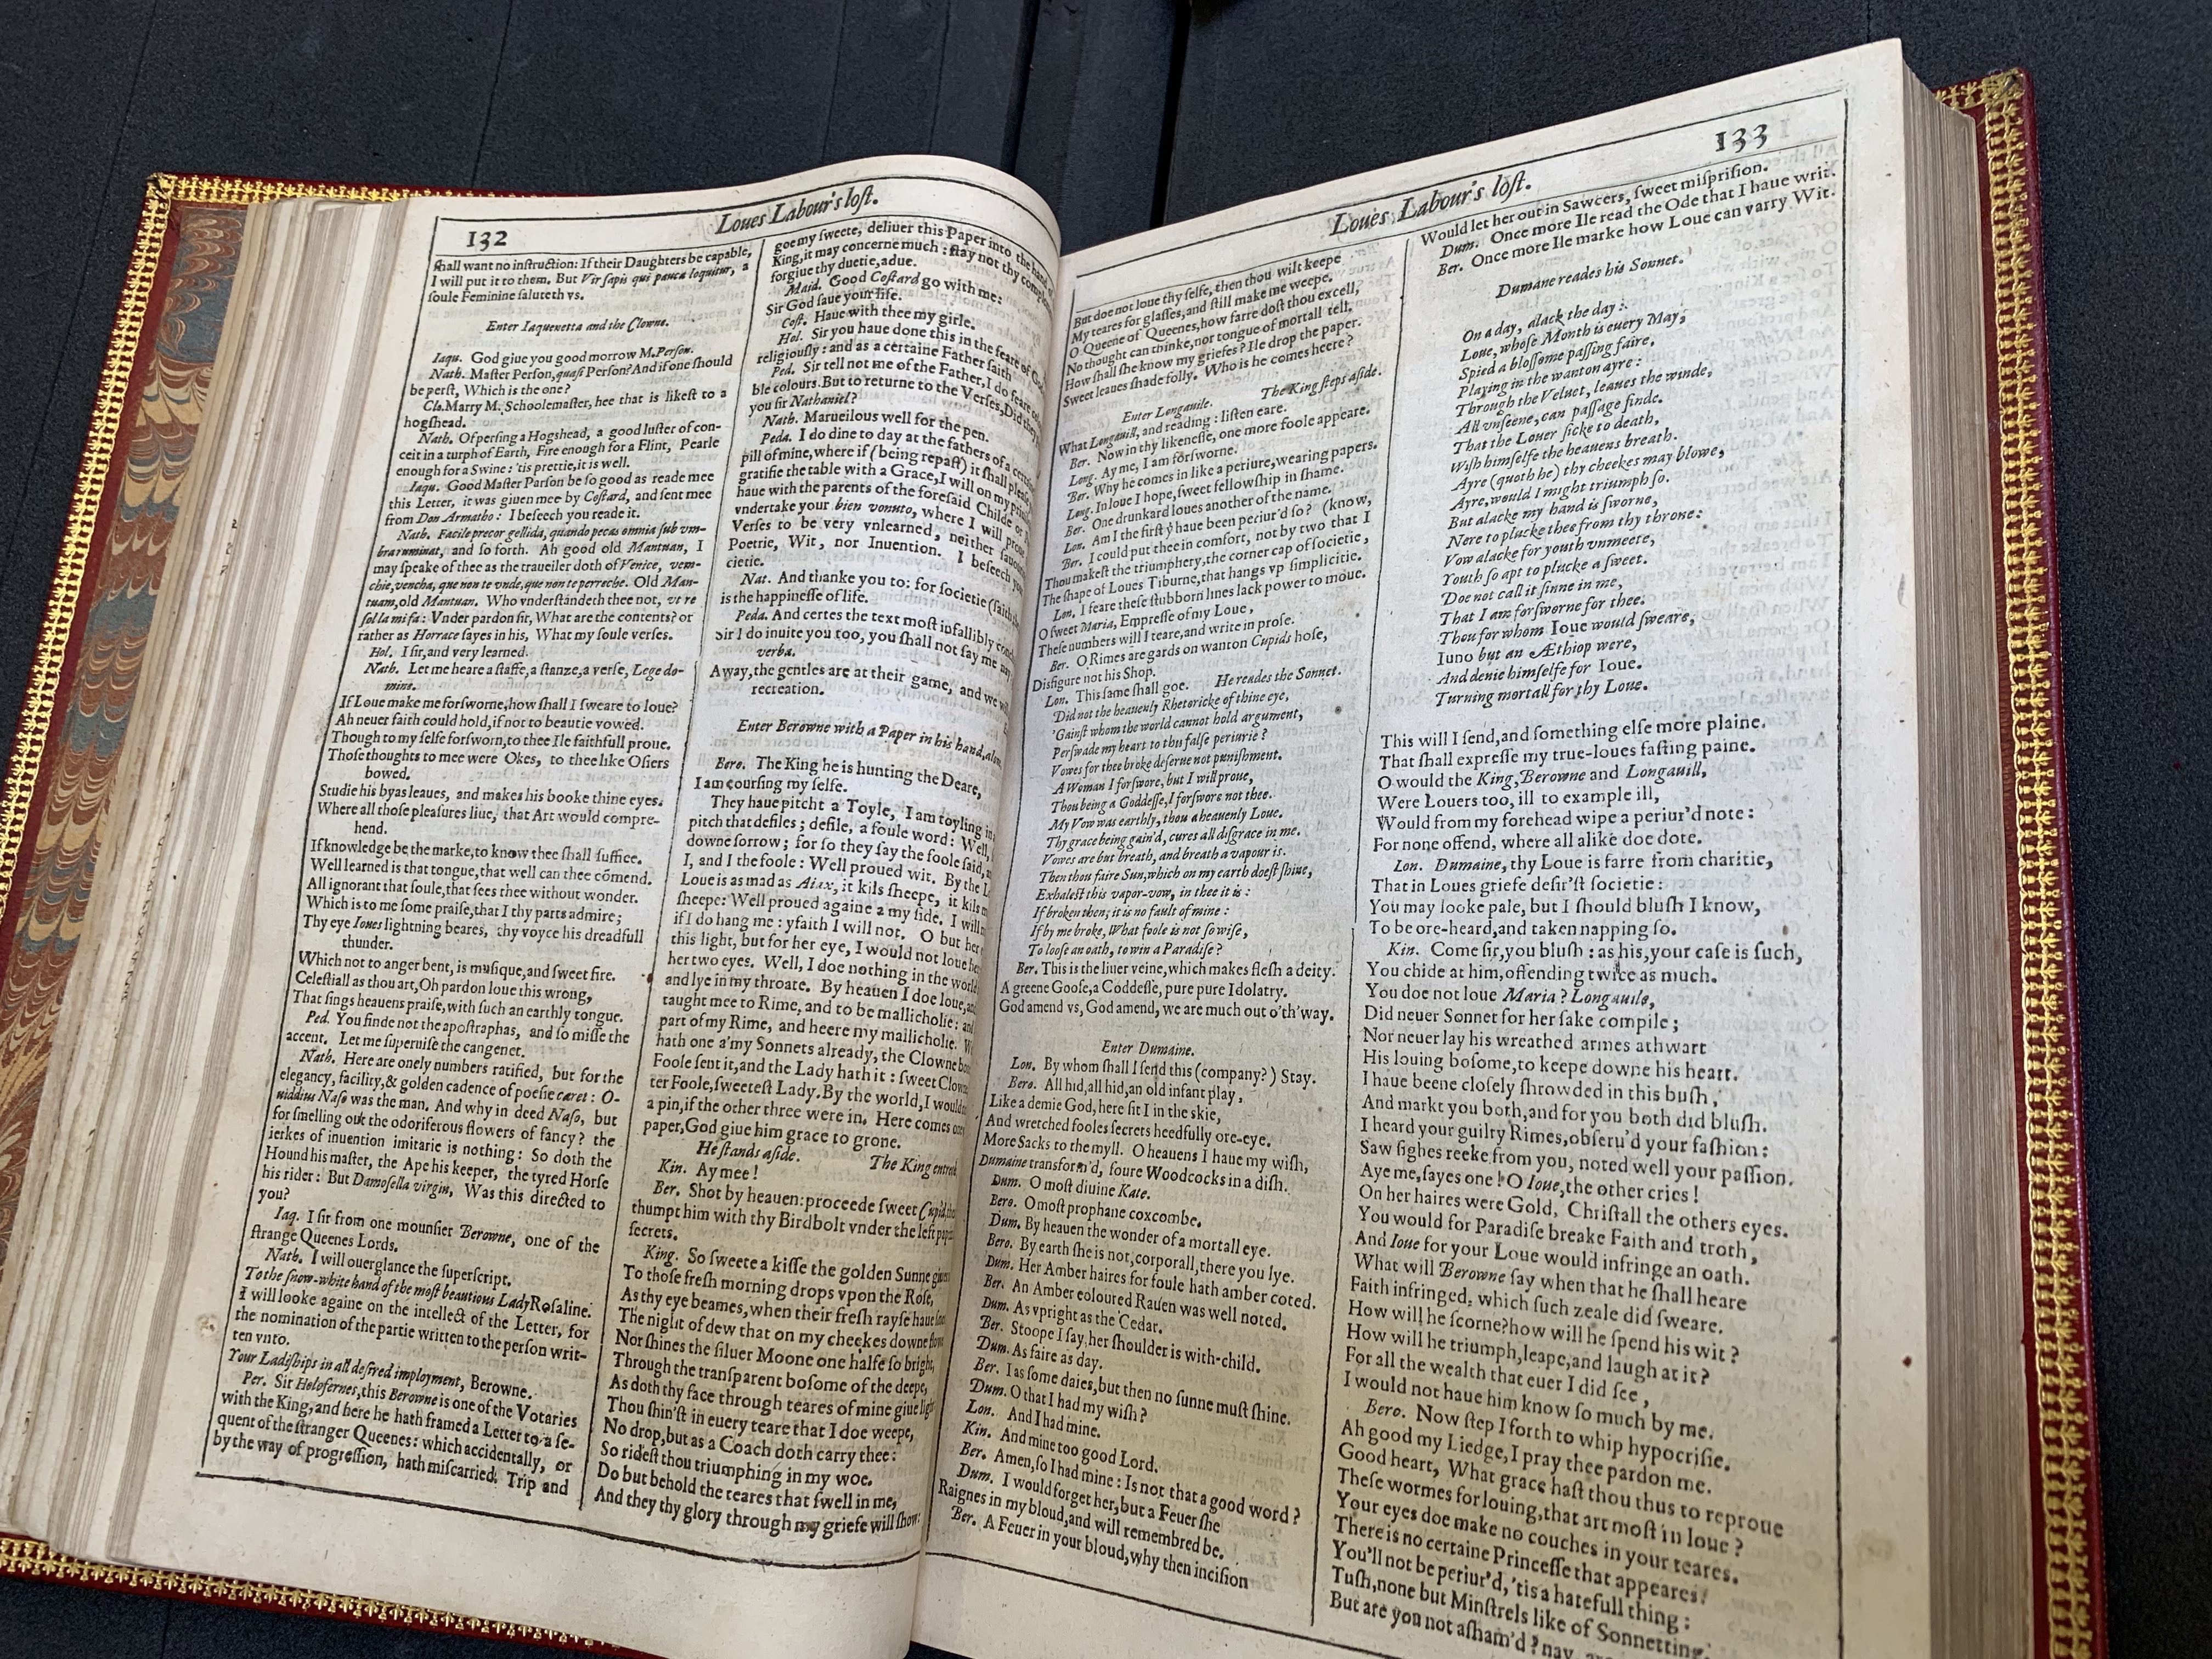 Cropped image of pages 132-133 of the First Folio showing scenes from Love's Labour Lost.